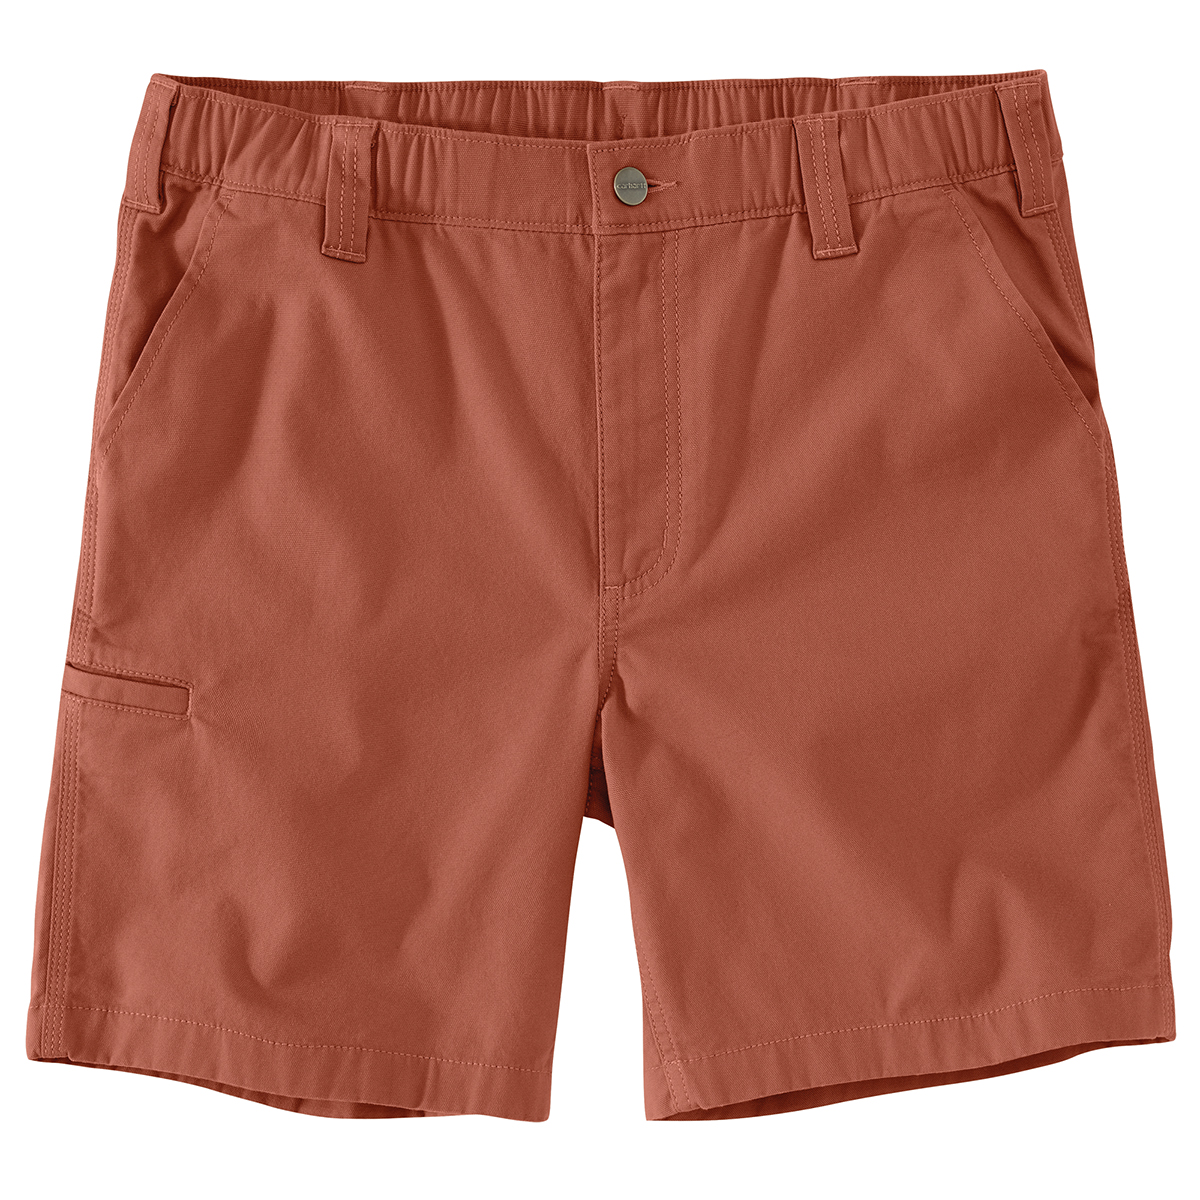 Carhartt Men's 105841 Rugged Flex Relaxed Fit 8In Canvas Work Short, Extended Sizes, Orange